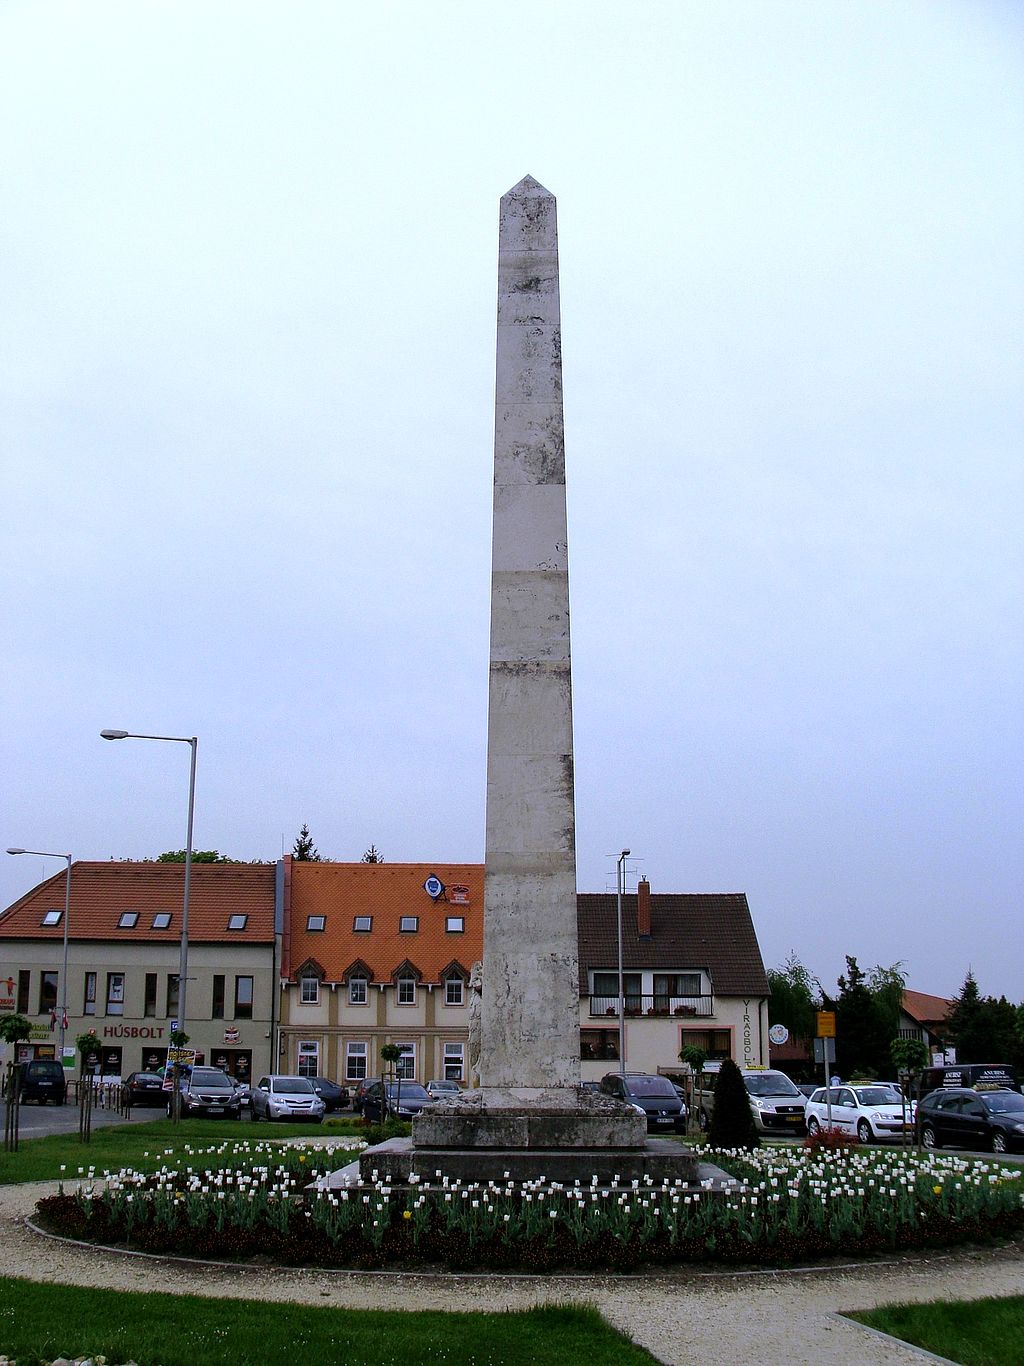 WWI monuments from Mosonmagyar&oacute;v&aacute;r, Hungary